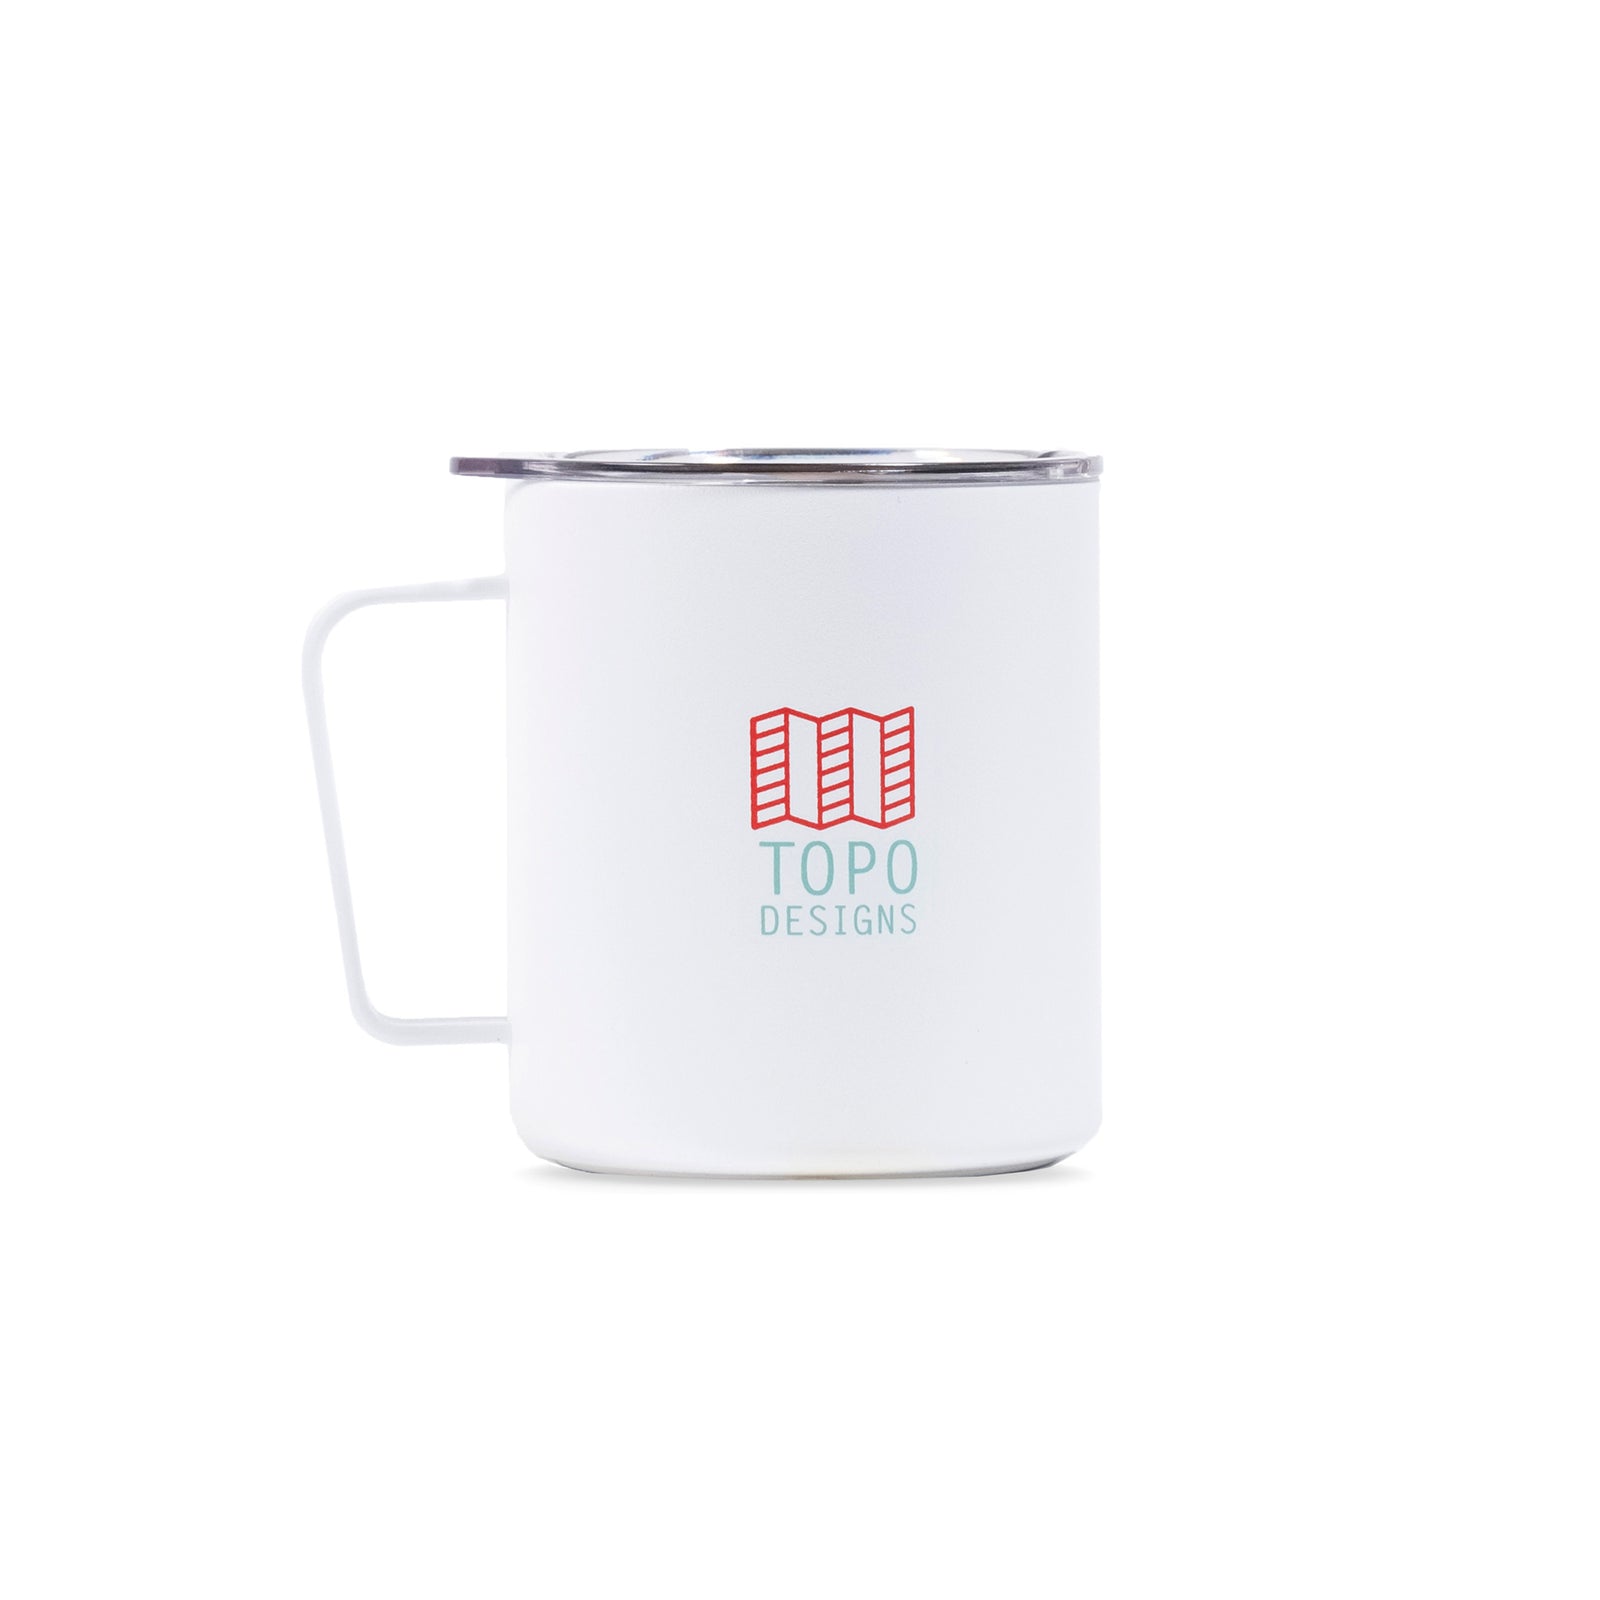 Full top product shot of the Topo Designs x Miir Camp Mug in "White / Turquoise Round Logo" showing lid fitting.